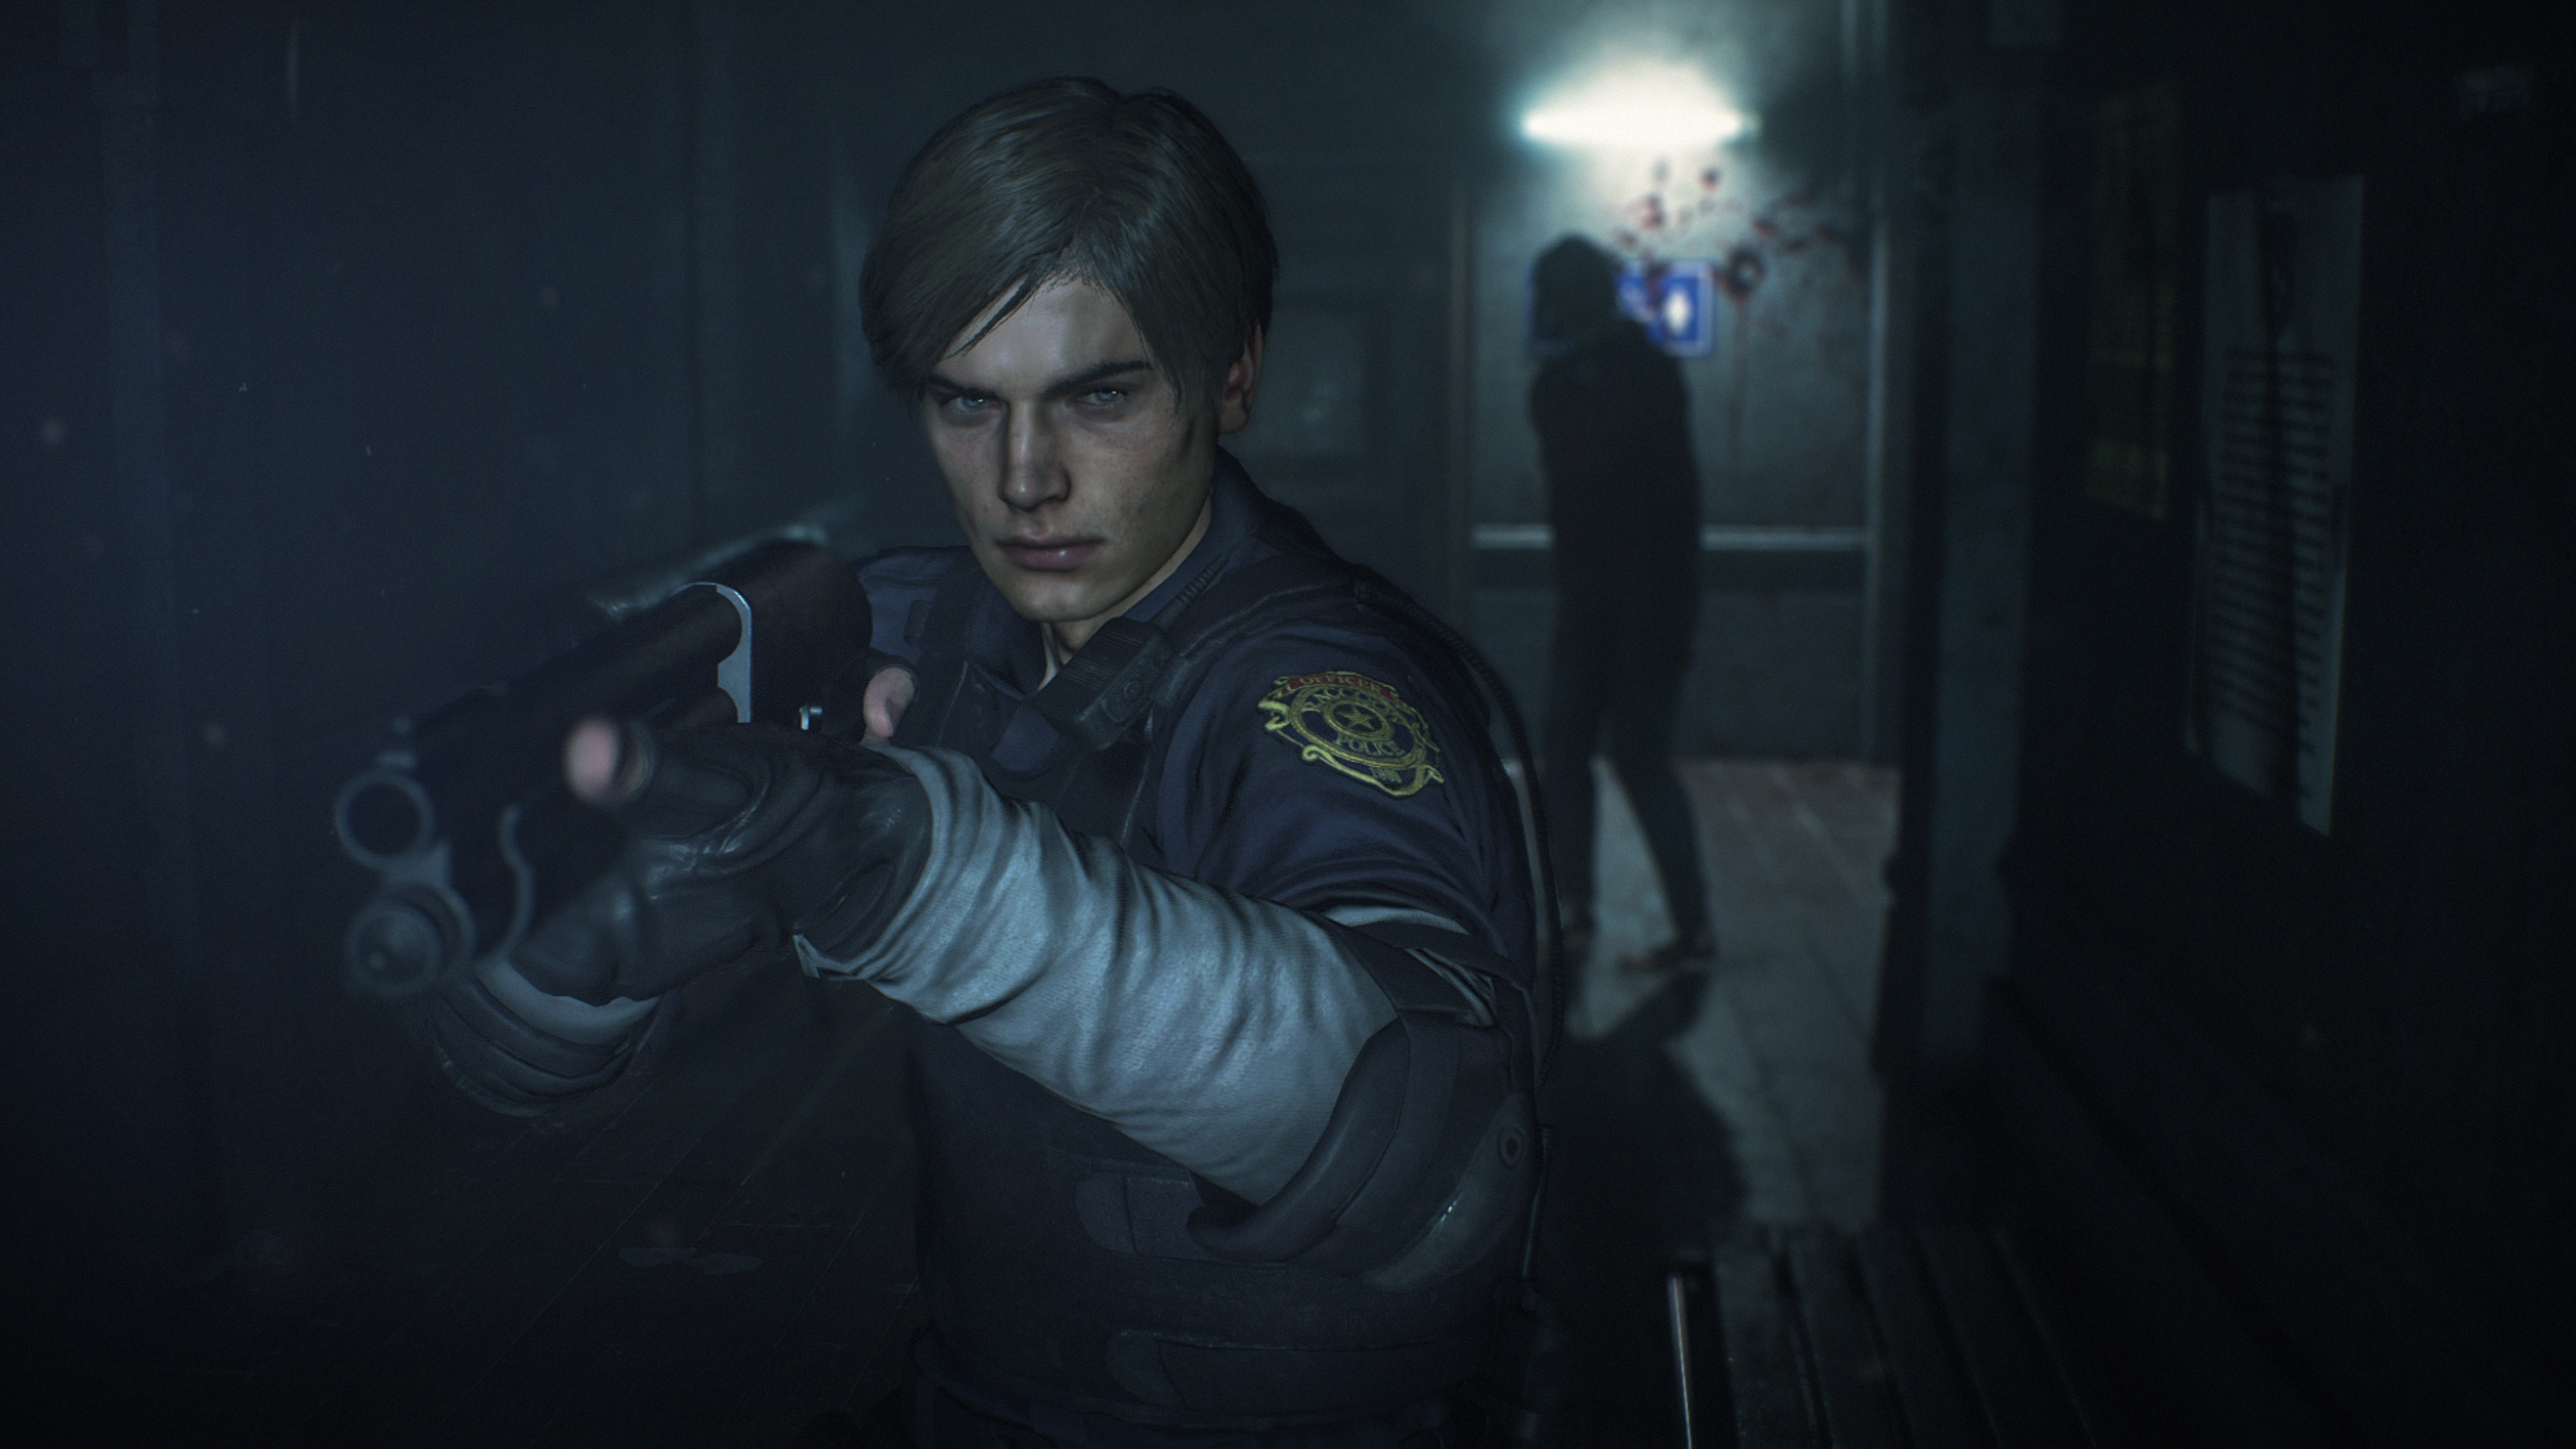 Resident Evil 2 (2019) Wallpapers, Pictures, Images